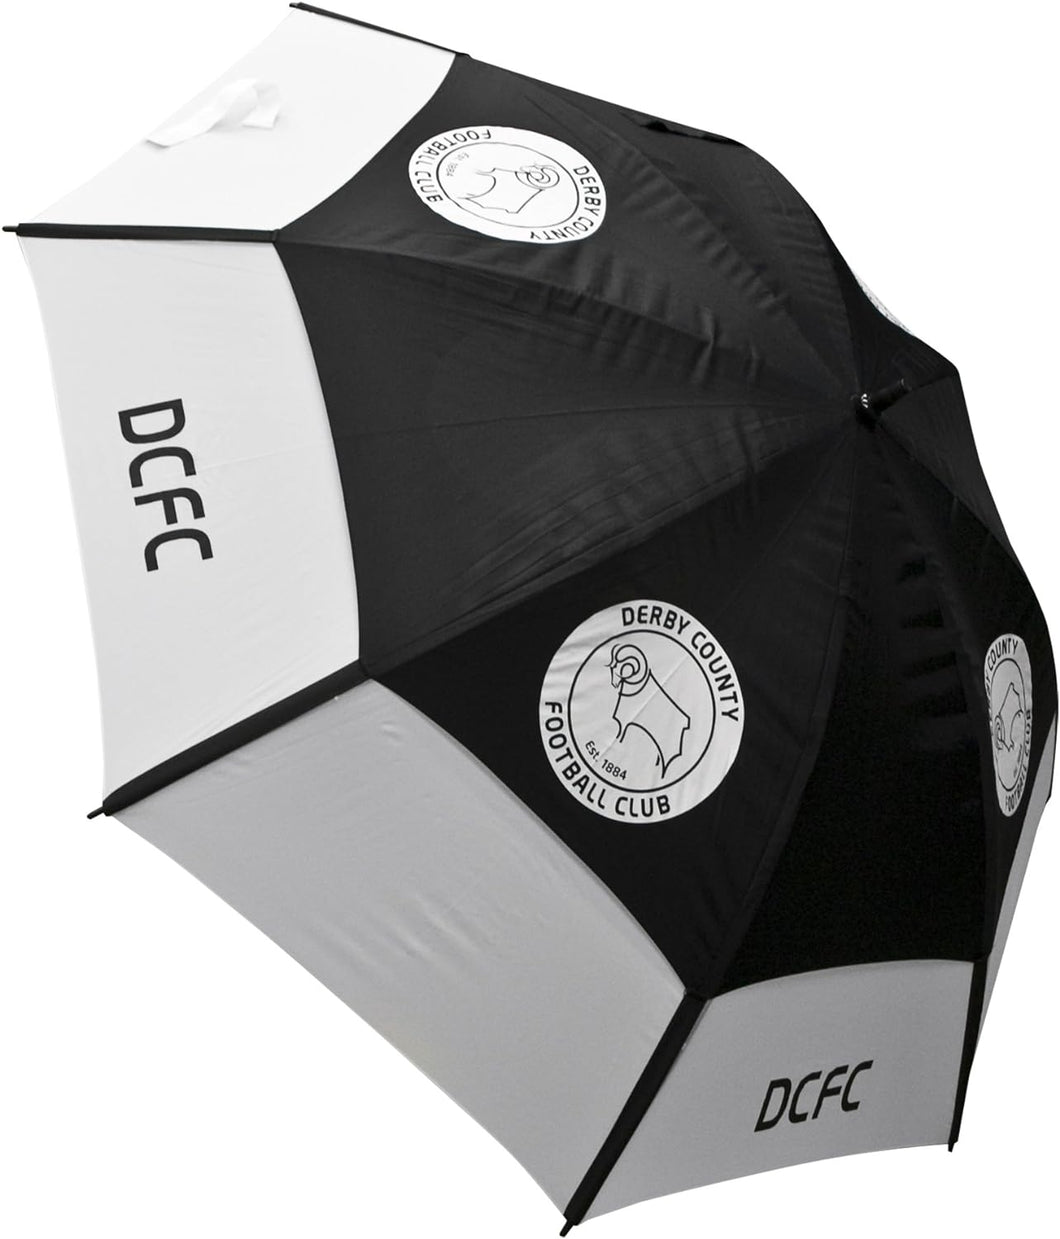 Derby County Tourvent Double Canopy Golf Umbrella.